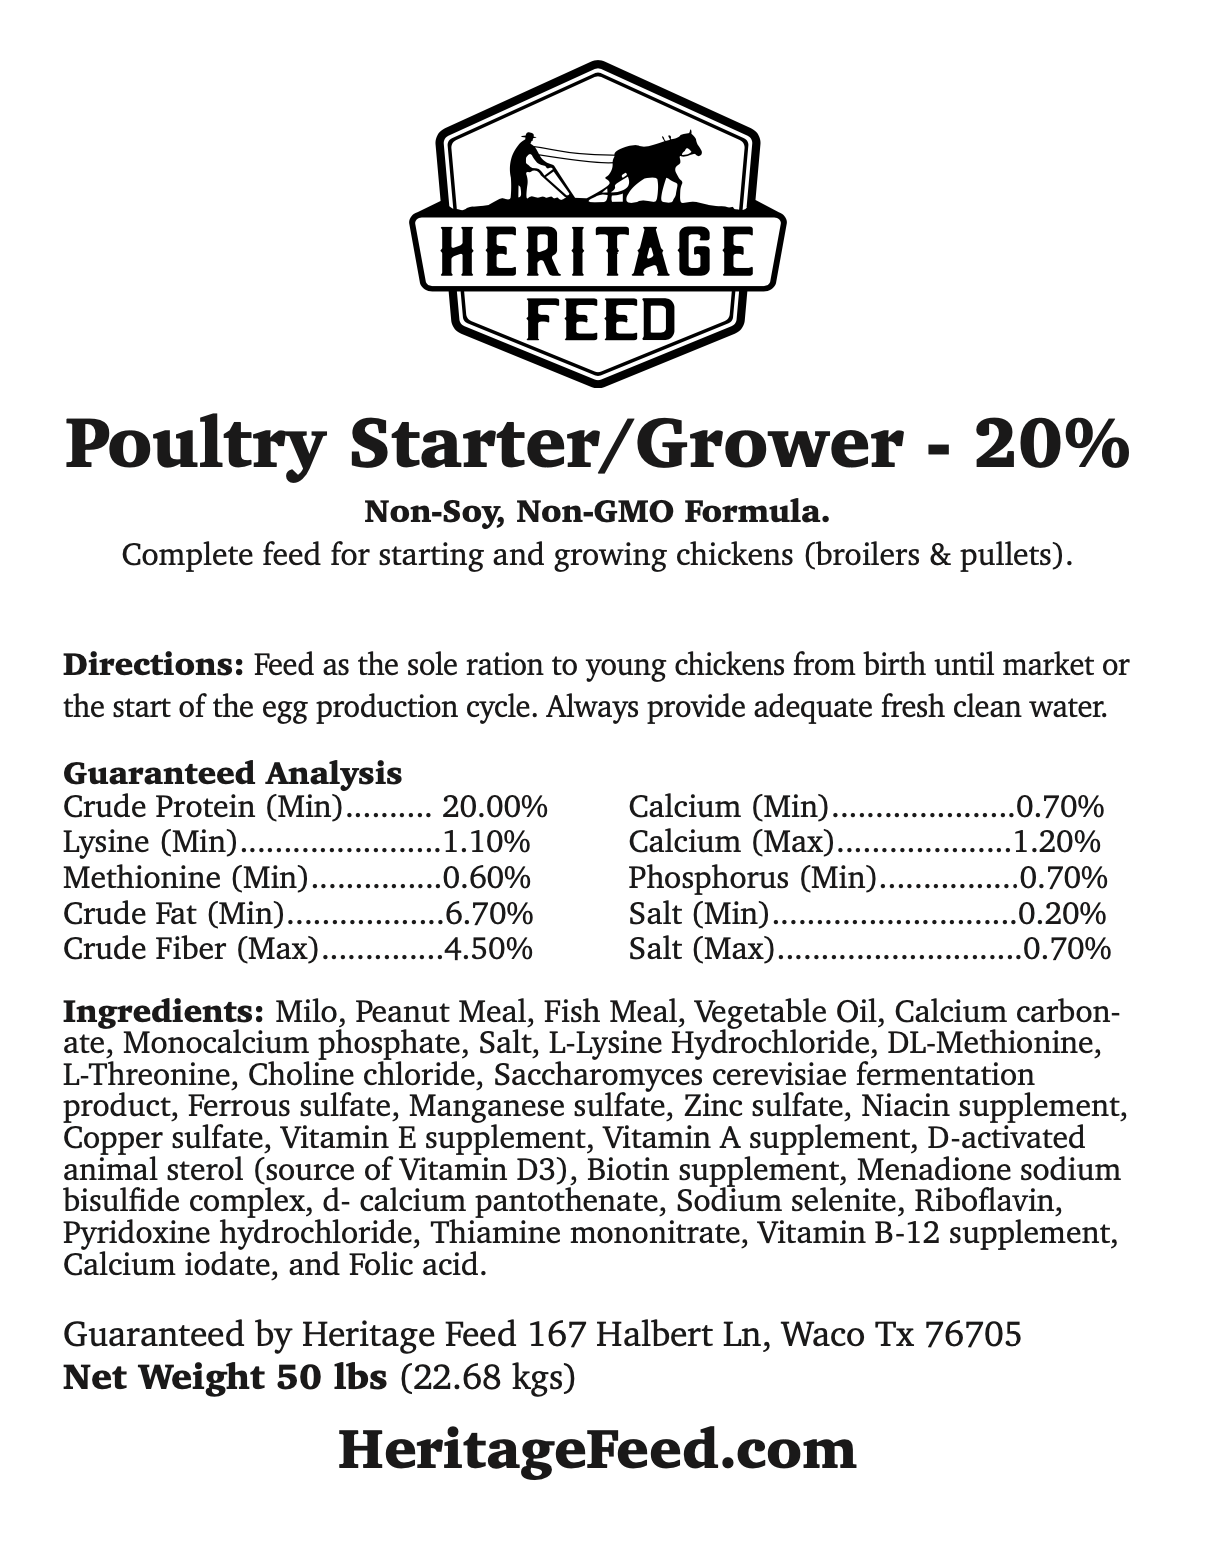 NON-GMO Poultry Starter/Grower 20%